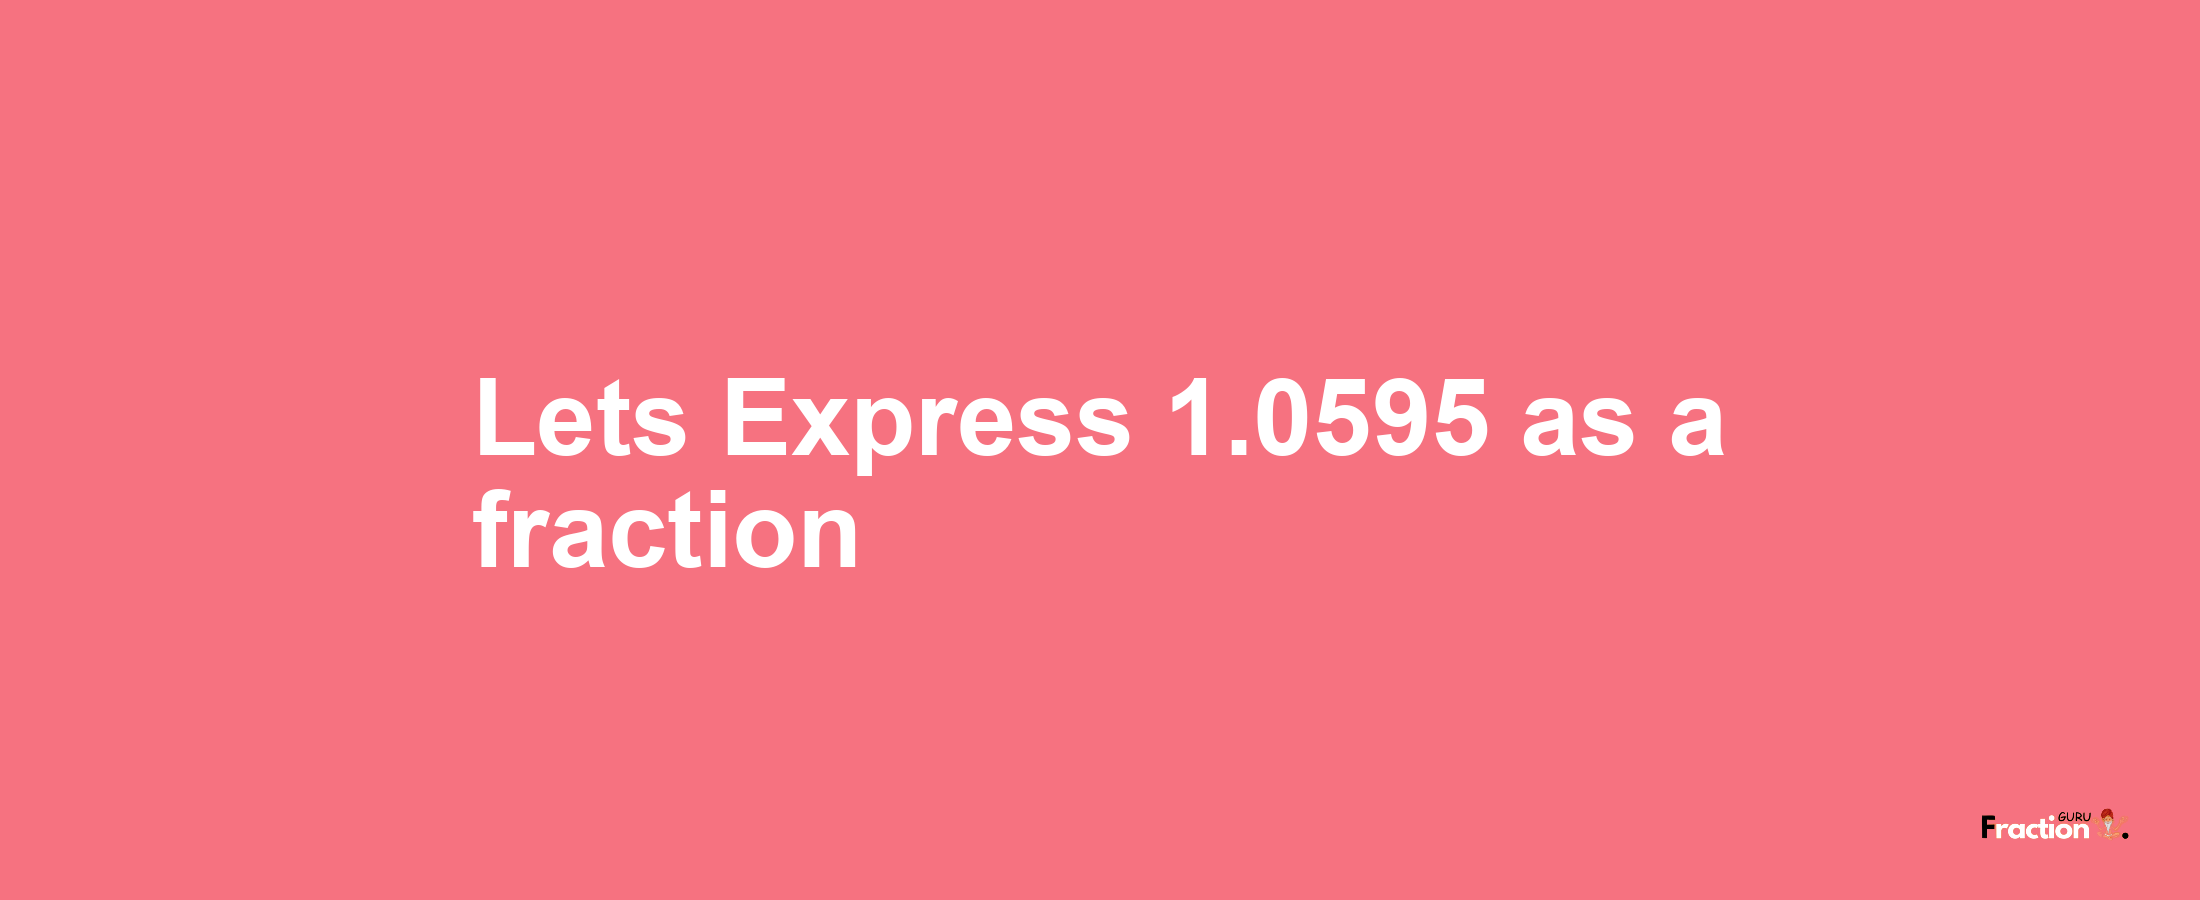 Lets Express 1.0595 as afraction